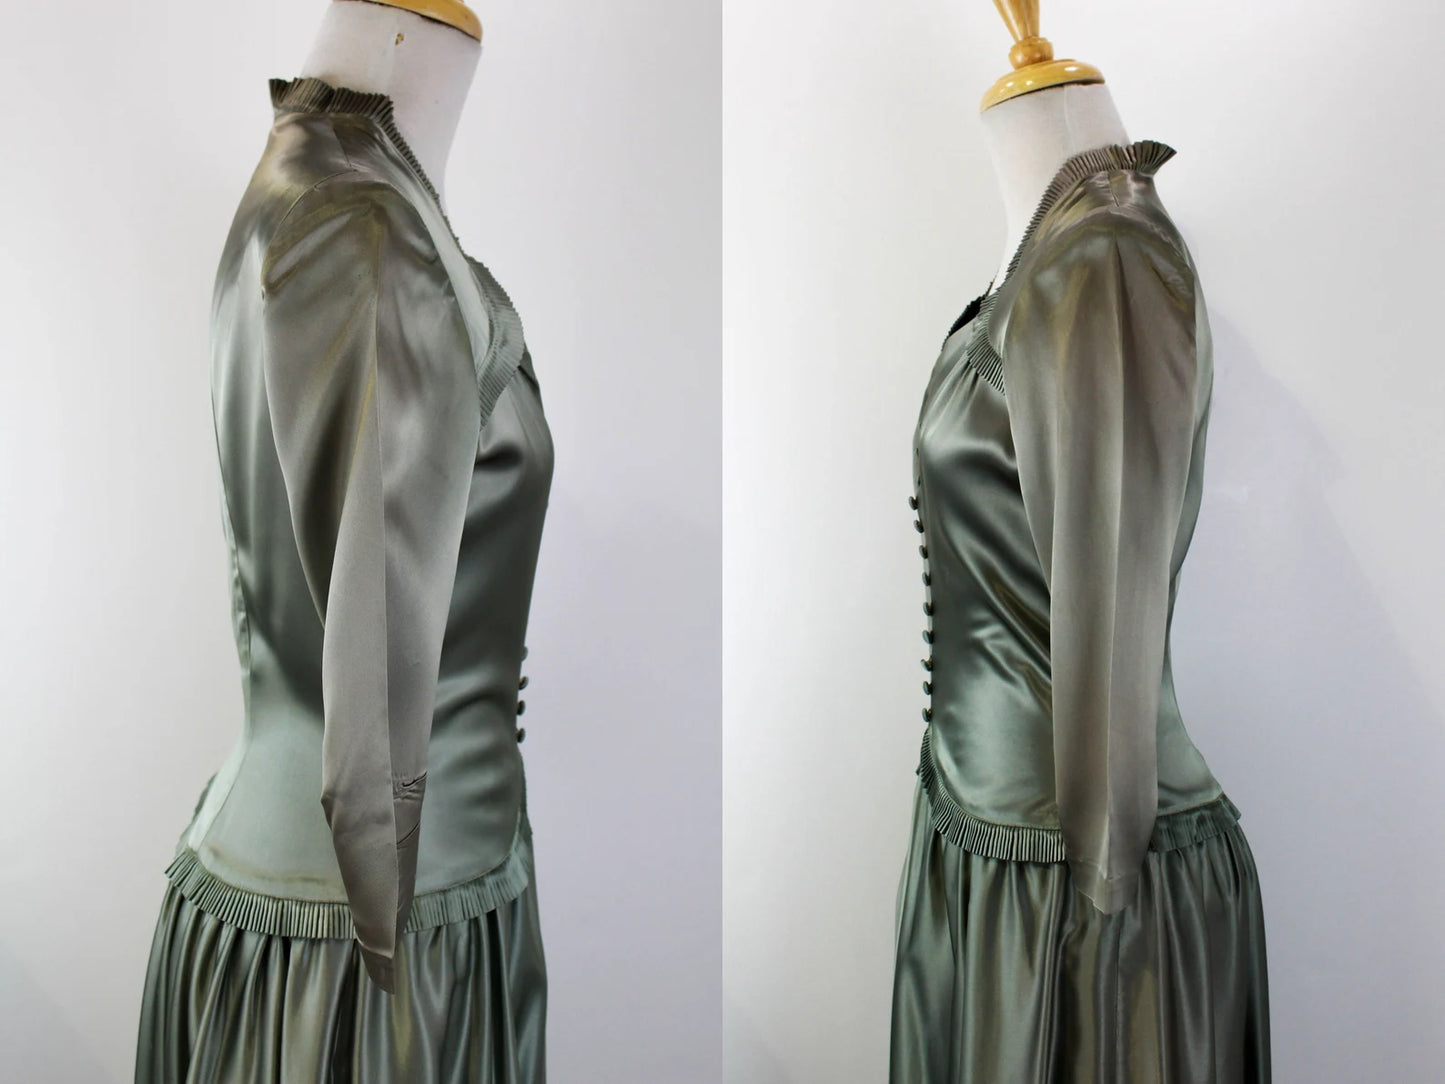 1940s Green Satin Gown, Full Skirt, Pleated Trim, Vintage 40s Dress, Covered Buttons, Maxi Length, 3/4 Sleeves, Bust 34